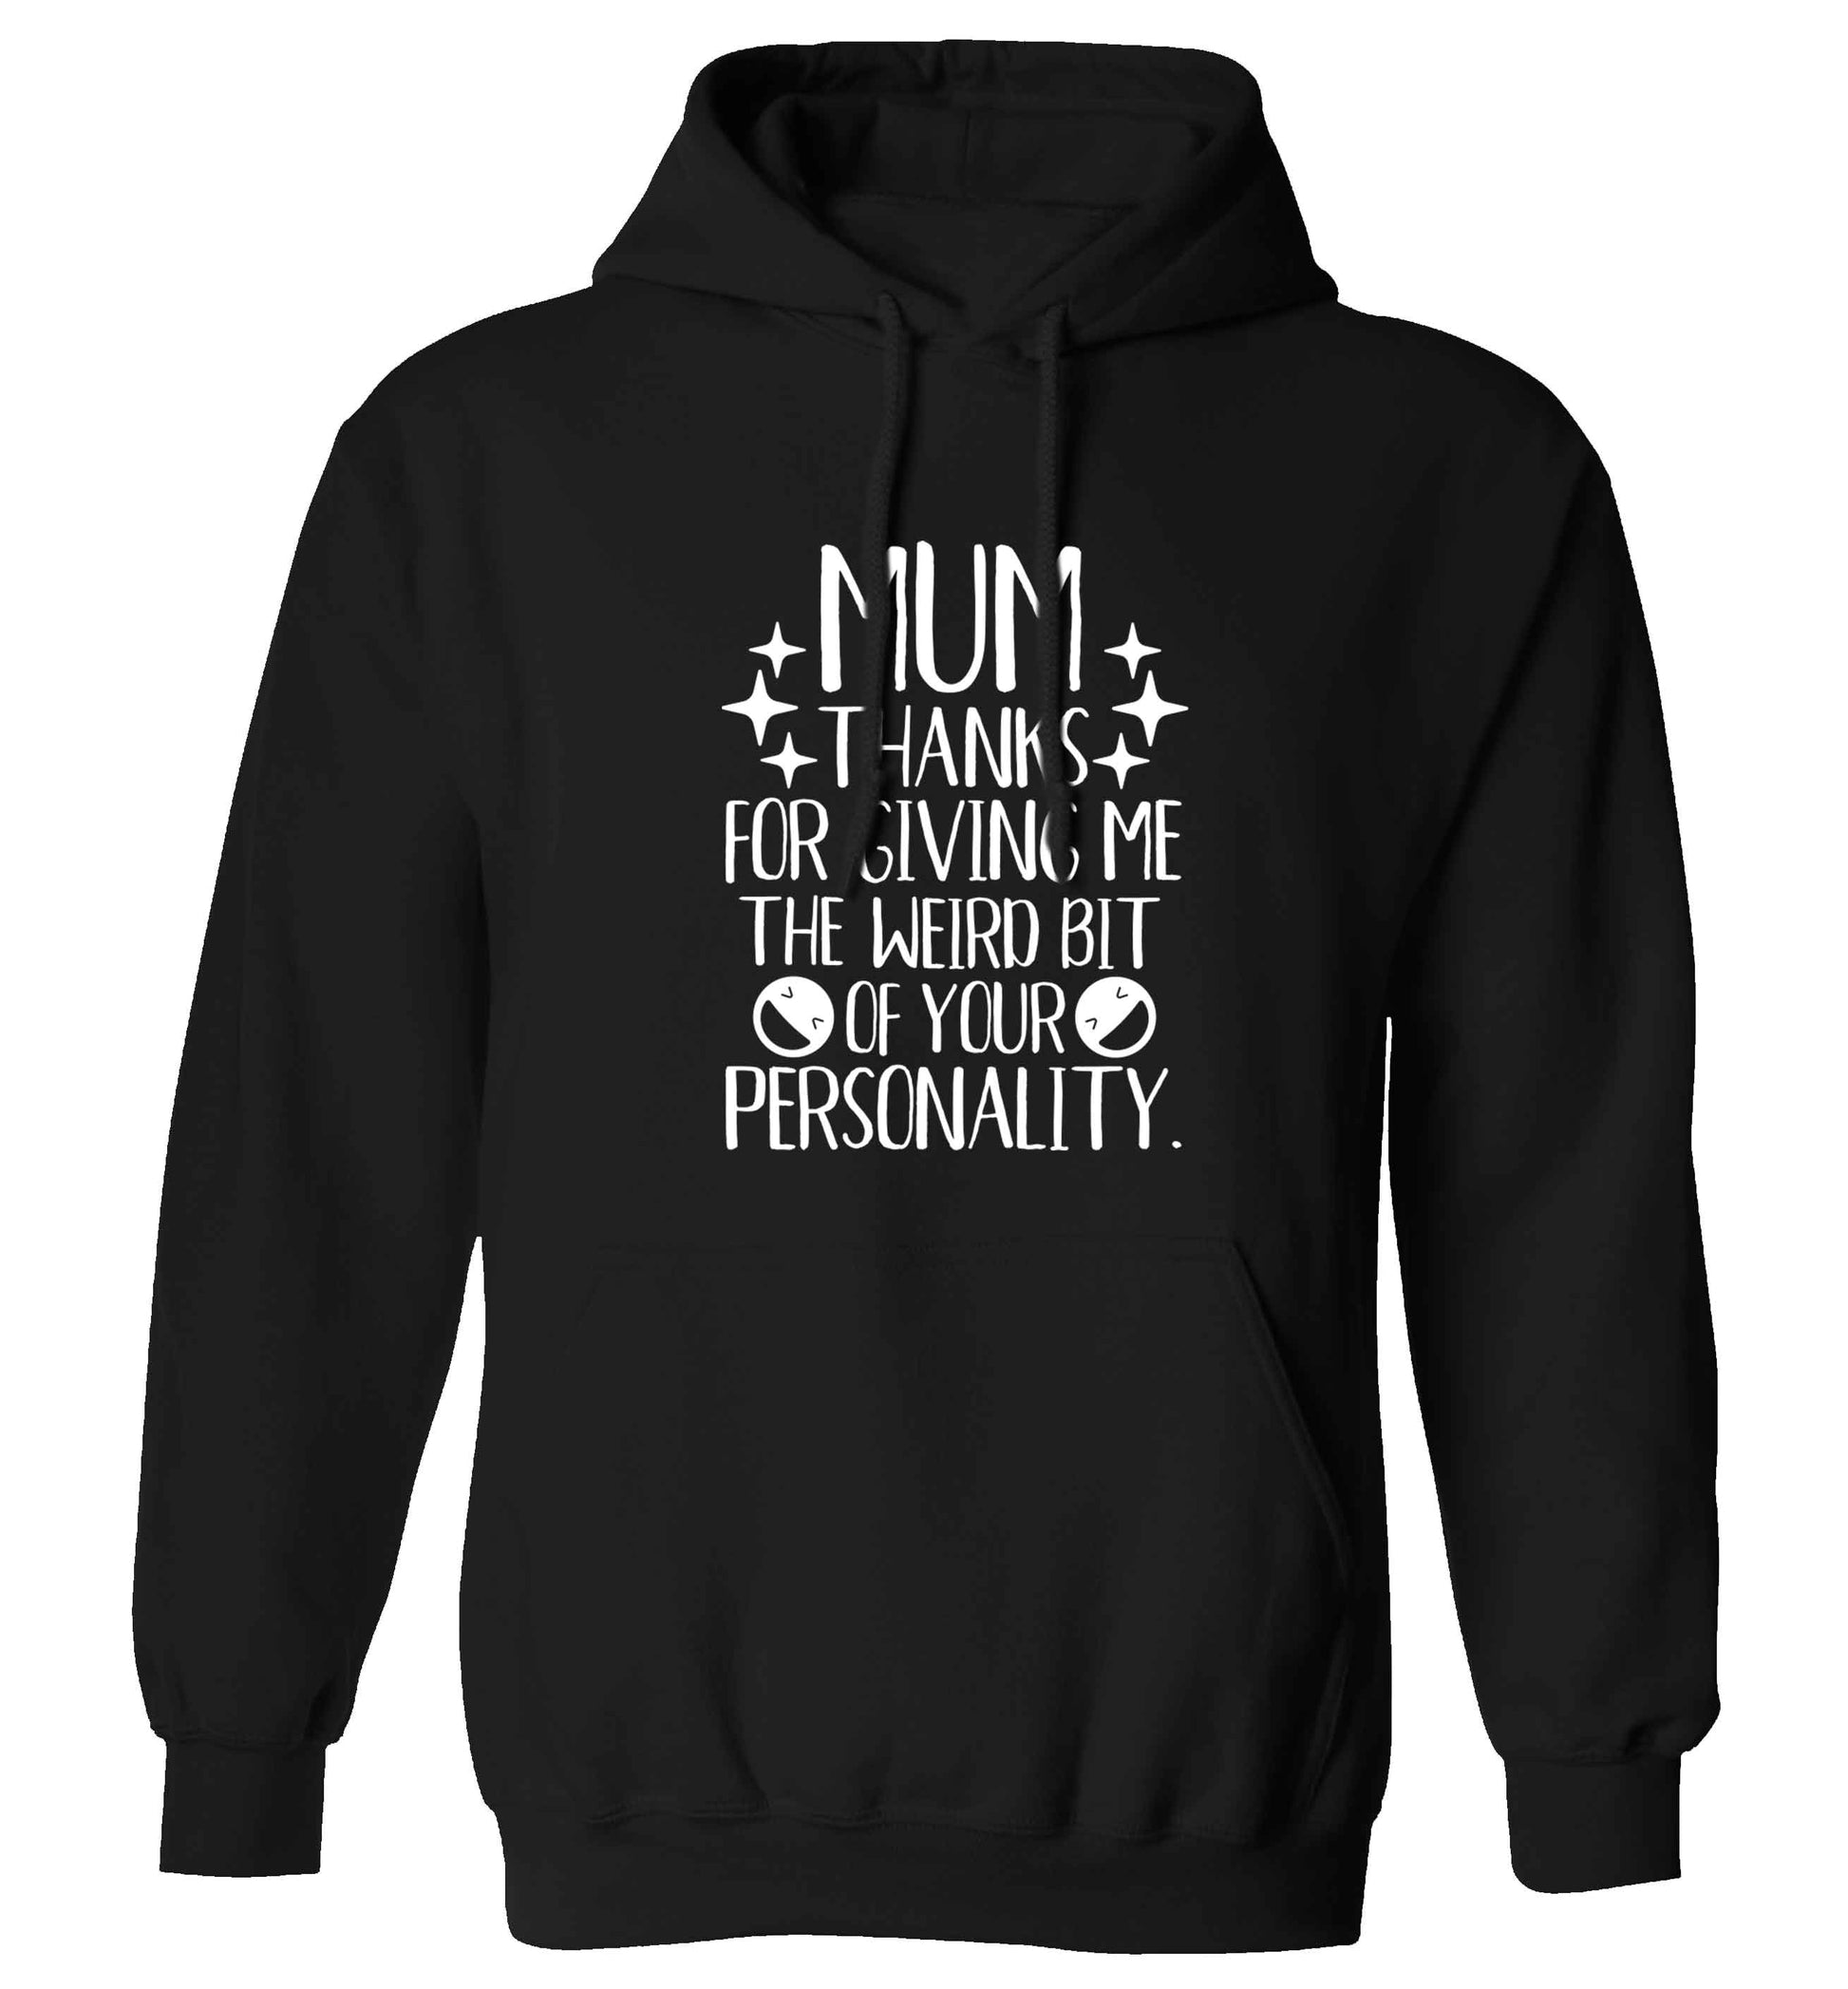 Mum, I love you more than halloumi and if you know me at all you know how deep that is adults unisex black hoodie 2XL